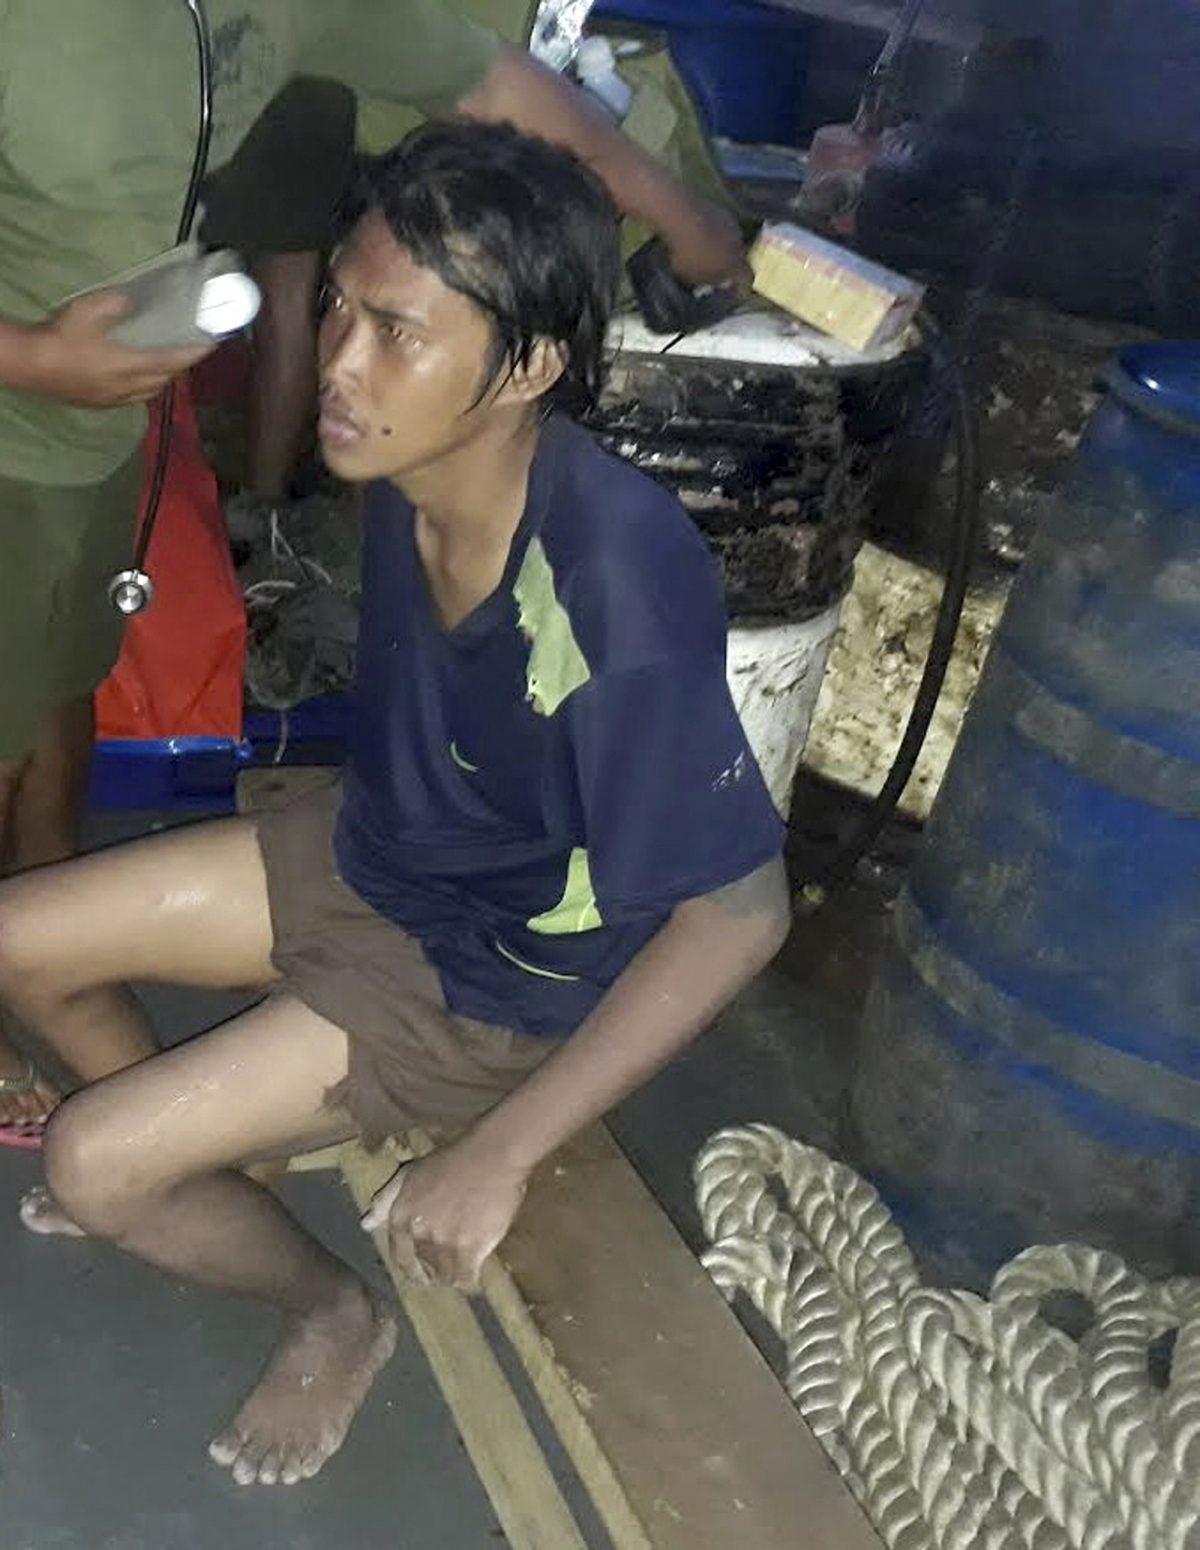 Indonesian hostage Heri Ardiansyah sits on a cot inside a Philippine Navy patrol boat following his rescue by Philippine troops on Simisa island, Sulu Province in the southern Philippines, on April 5, 2019. (WestMinCom Armed Forces of the Philippines via AP)